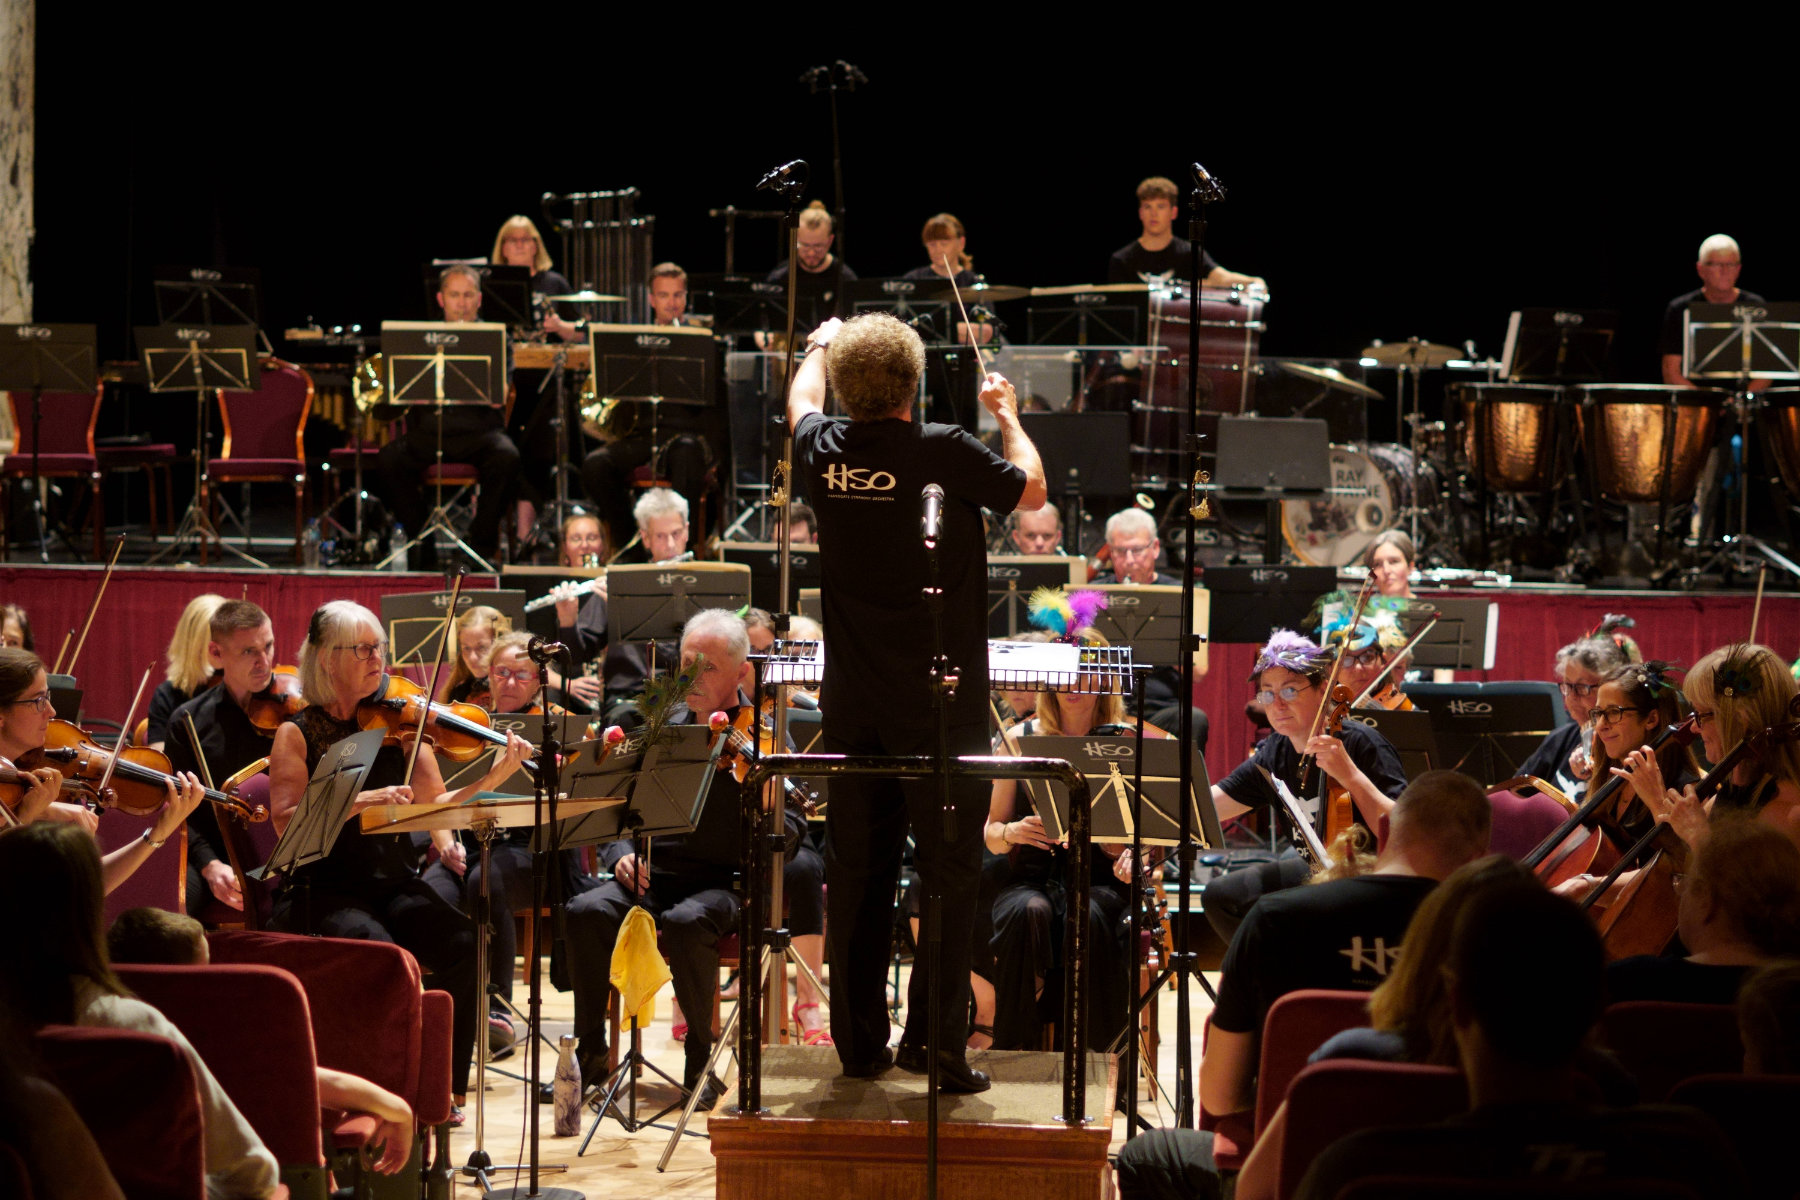 Harrogate Symphony Orchestra at the Royal Hall in Harrogate